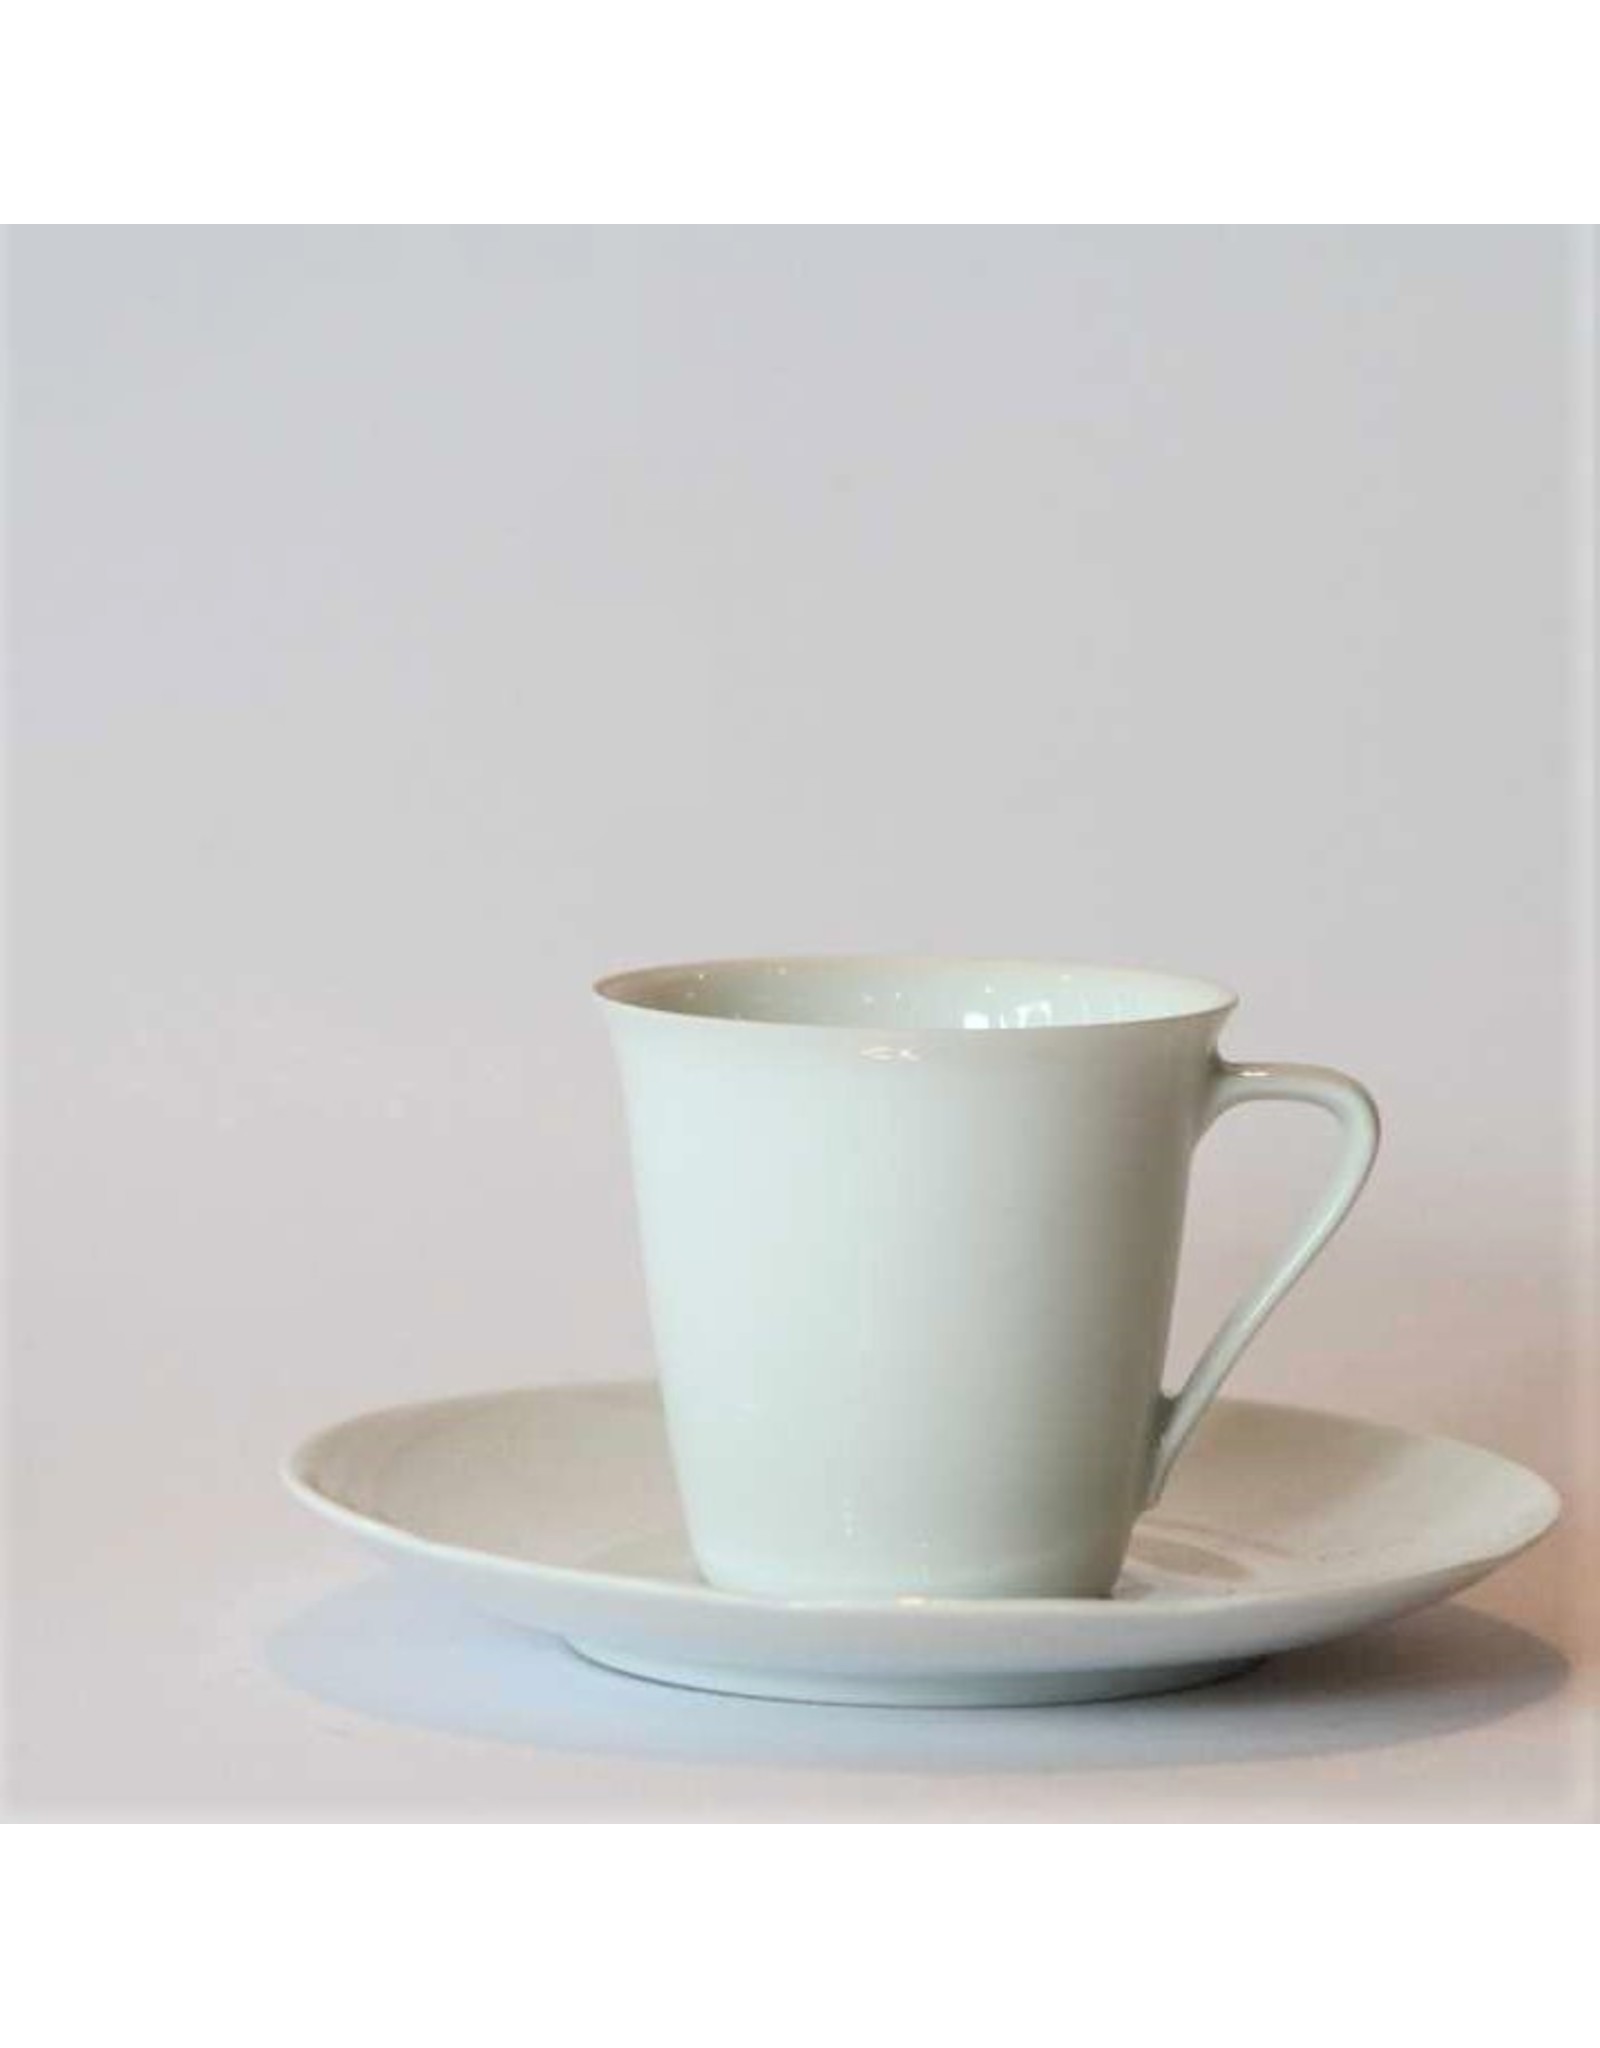 Cup and saucer - white porcelain, Rosenthal